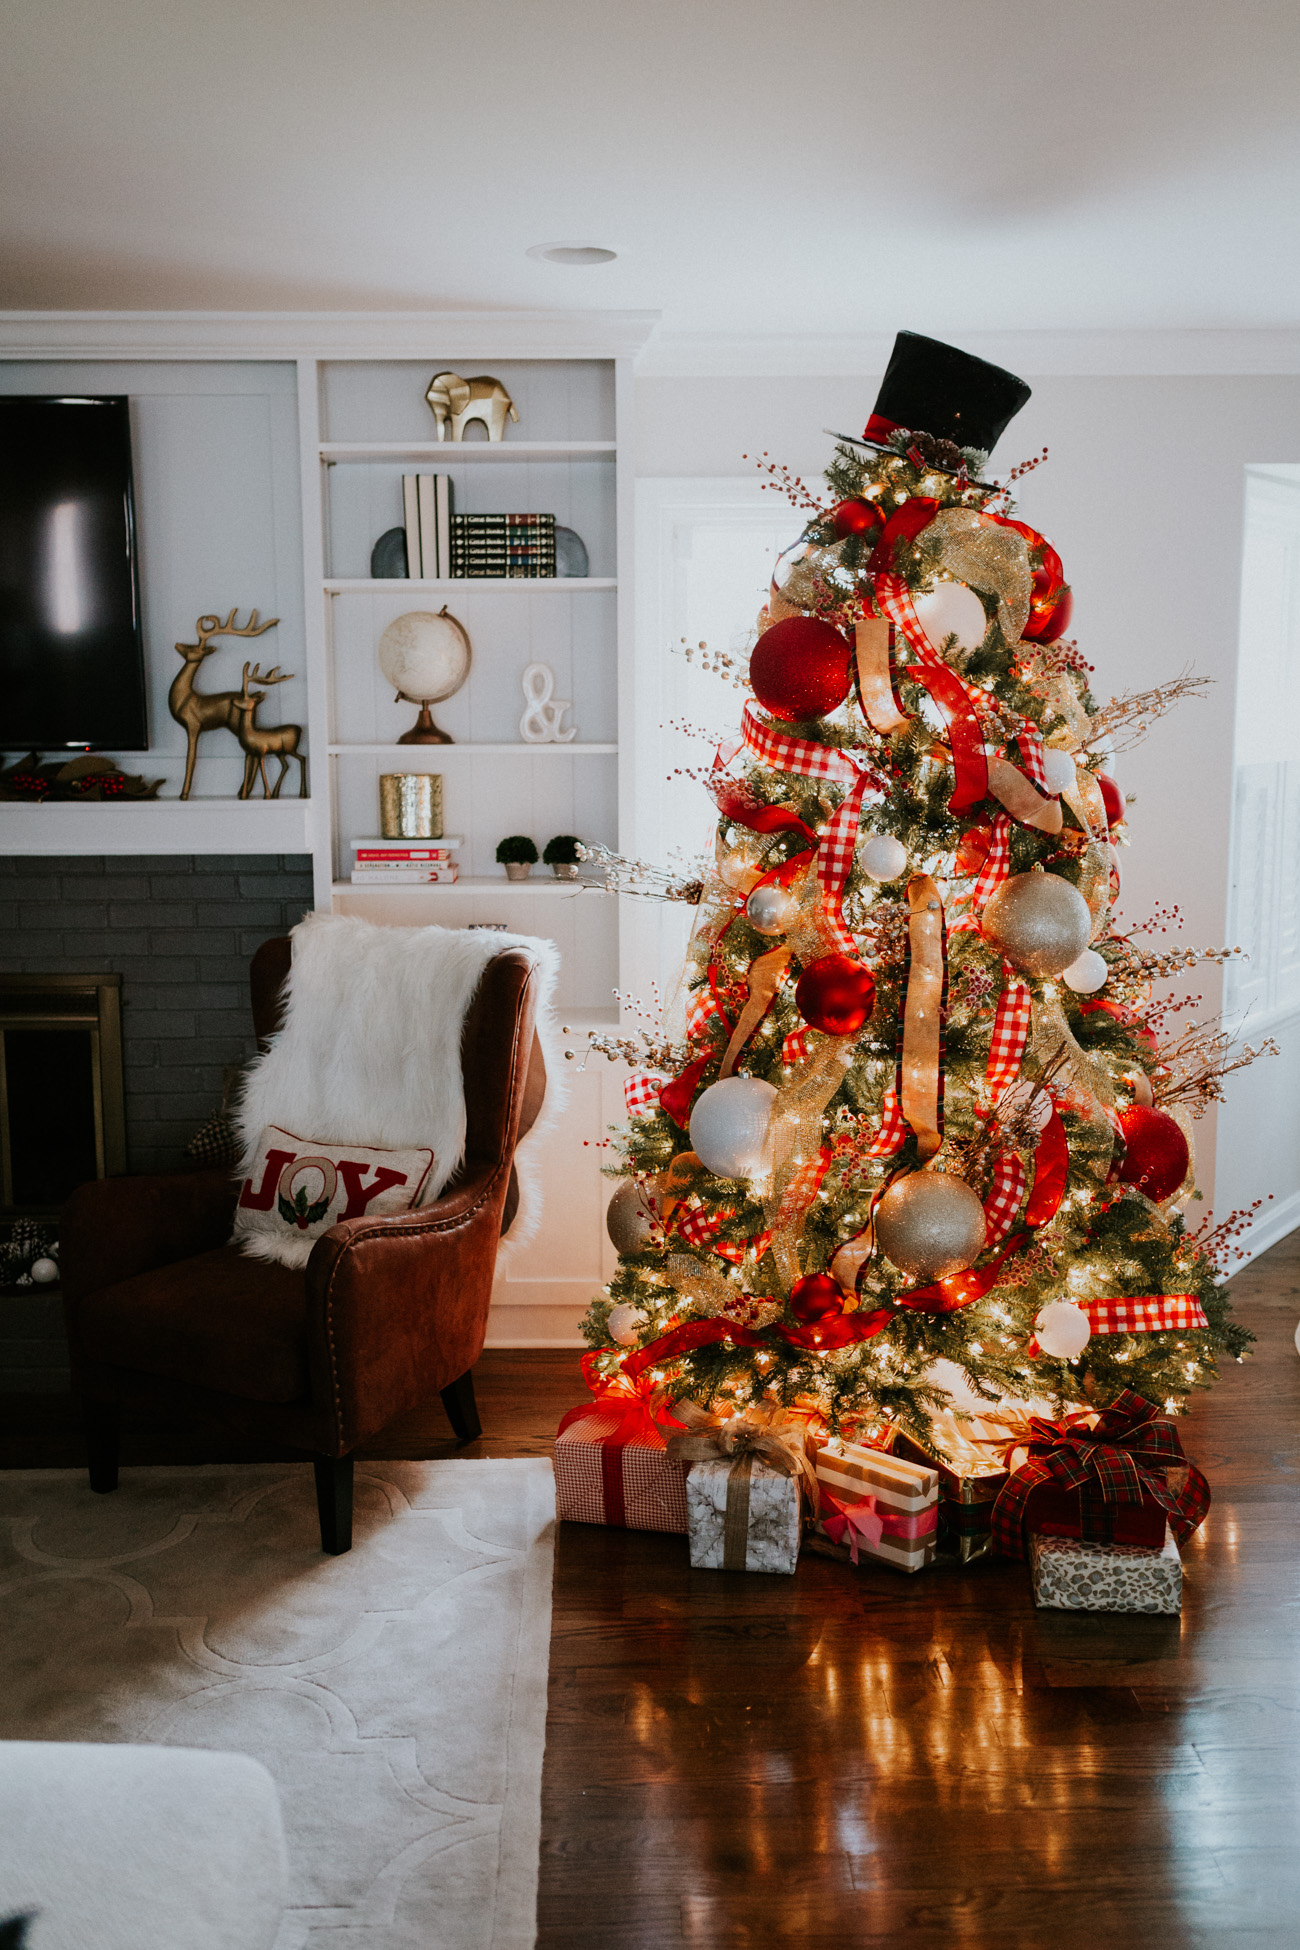 holiday home decor, holiday decorations, holiday decor ideas, nordstrom holiday decor, voluspa candles, holiday pillows, christmas throw blanket, faux fur pillow, faux fur throws, christmas tree decor, a southern drawl christmas tree, a southern drawl home // grace wainwright a southern drawl